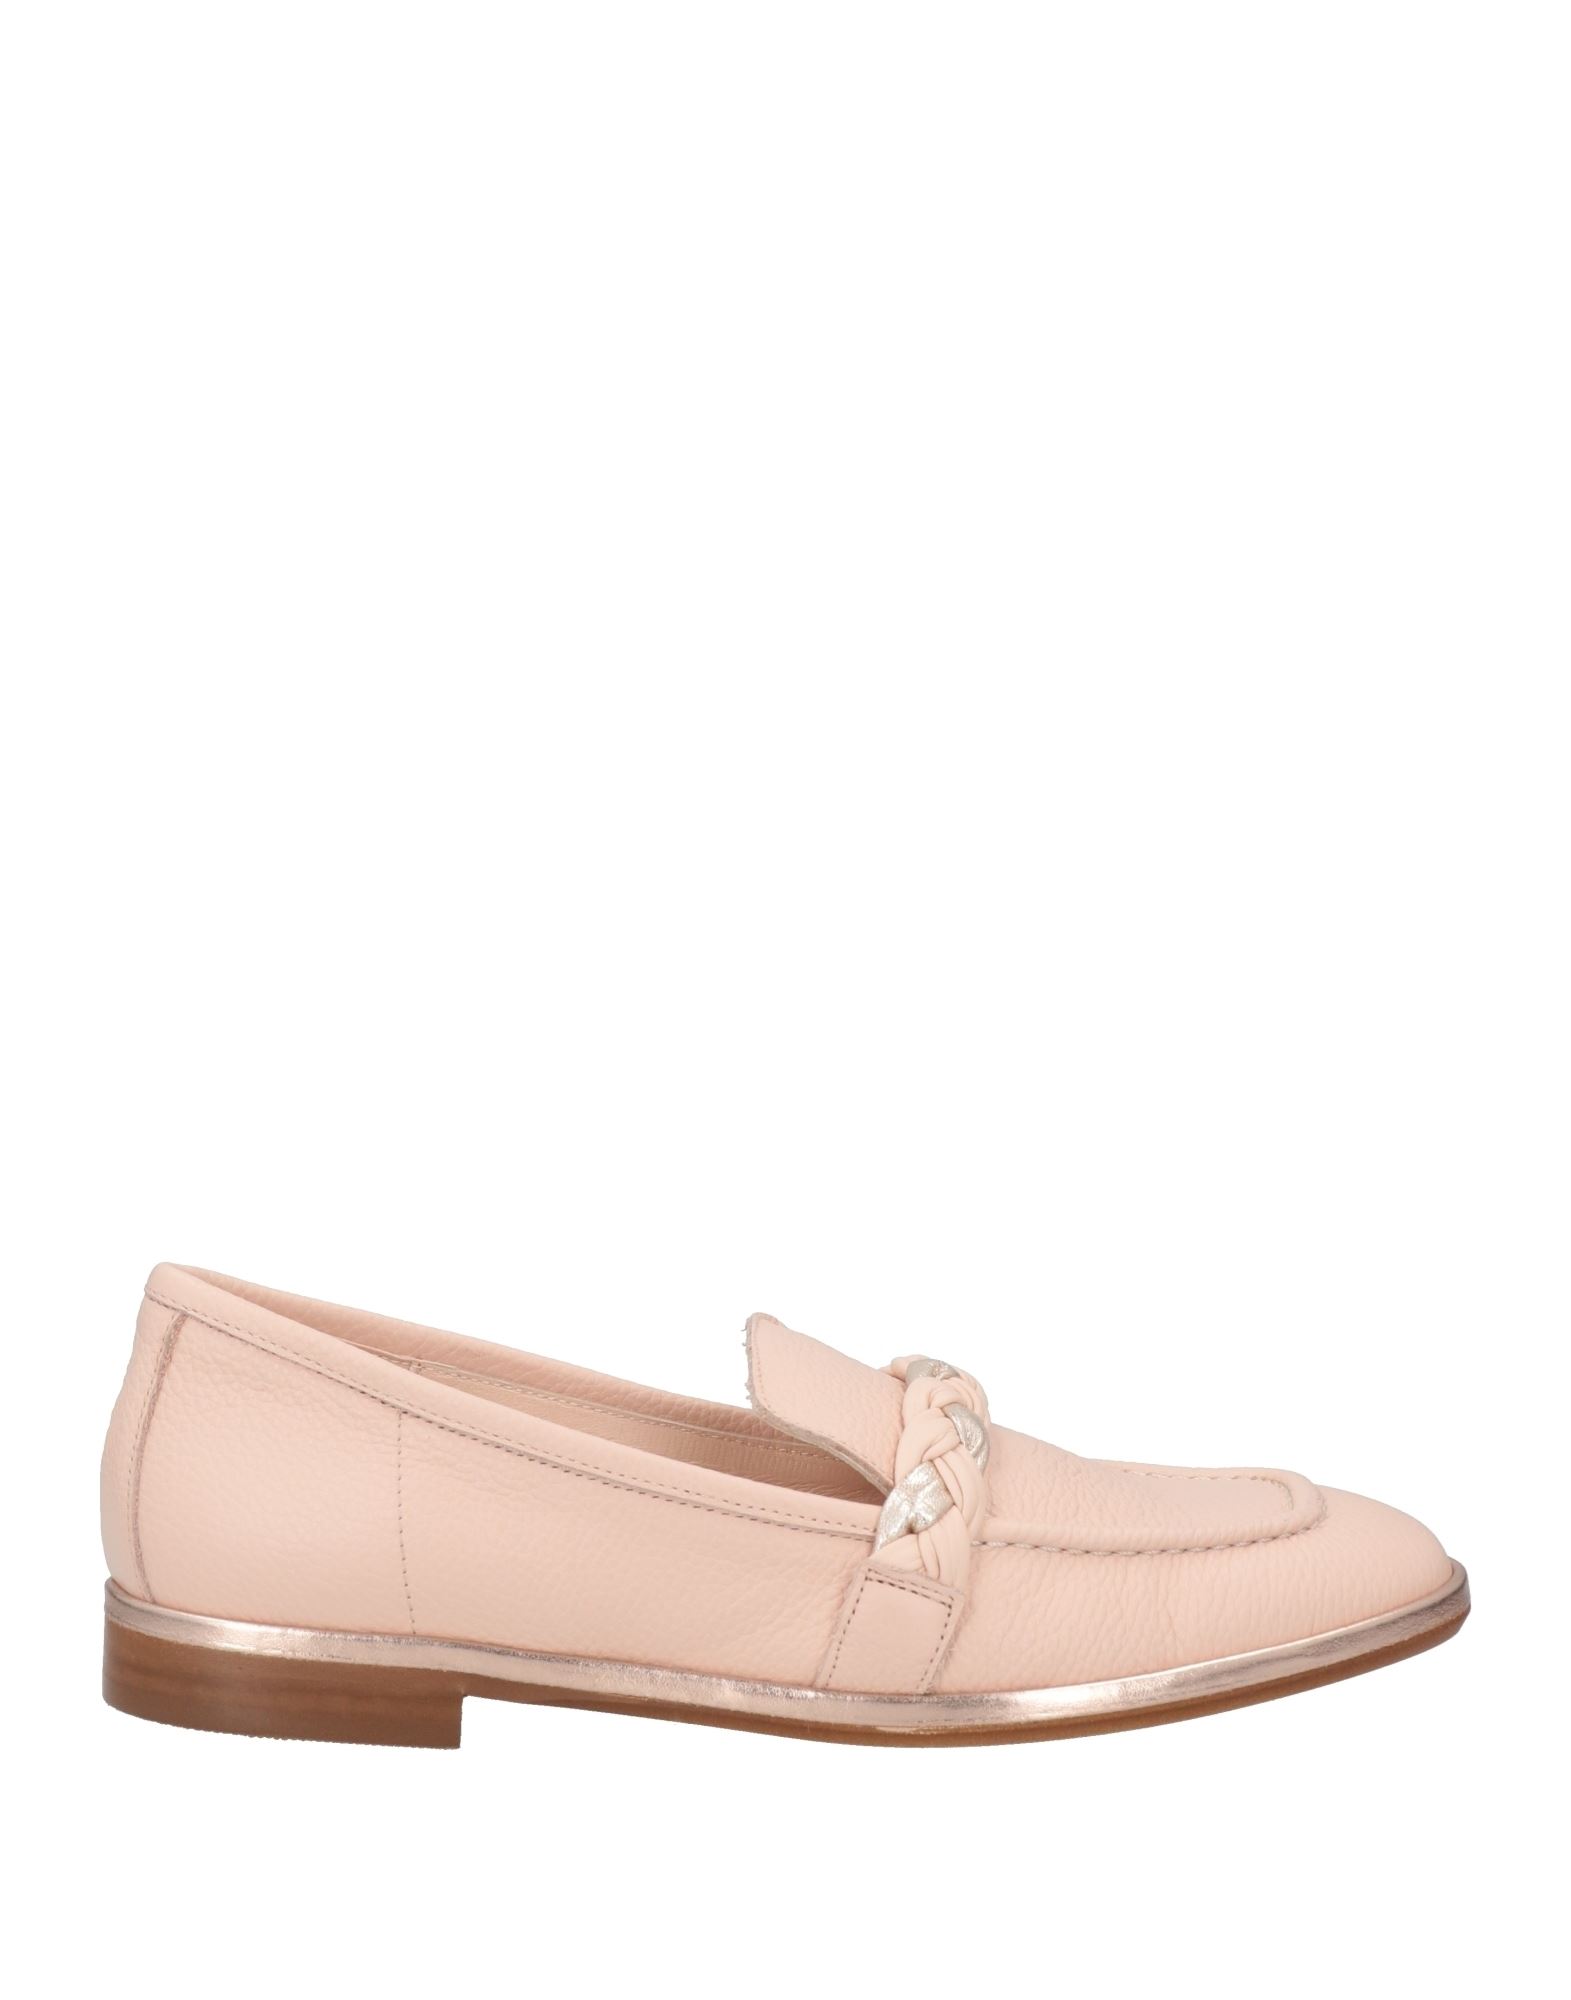 MARIAN MARIAN WOMAN LOAFERS PINK SIZE 6 SOFT LEATHER